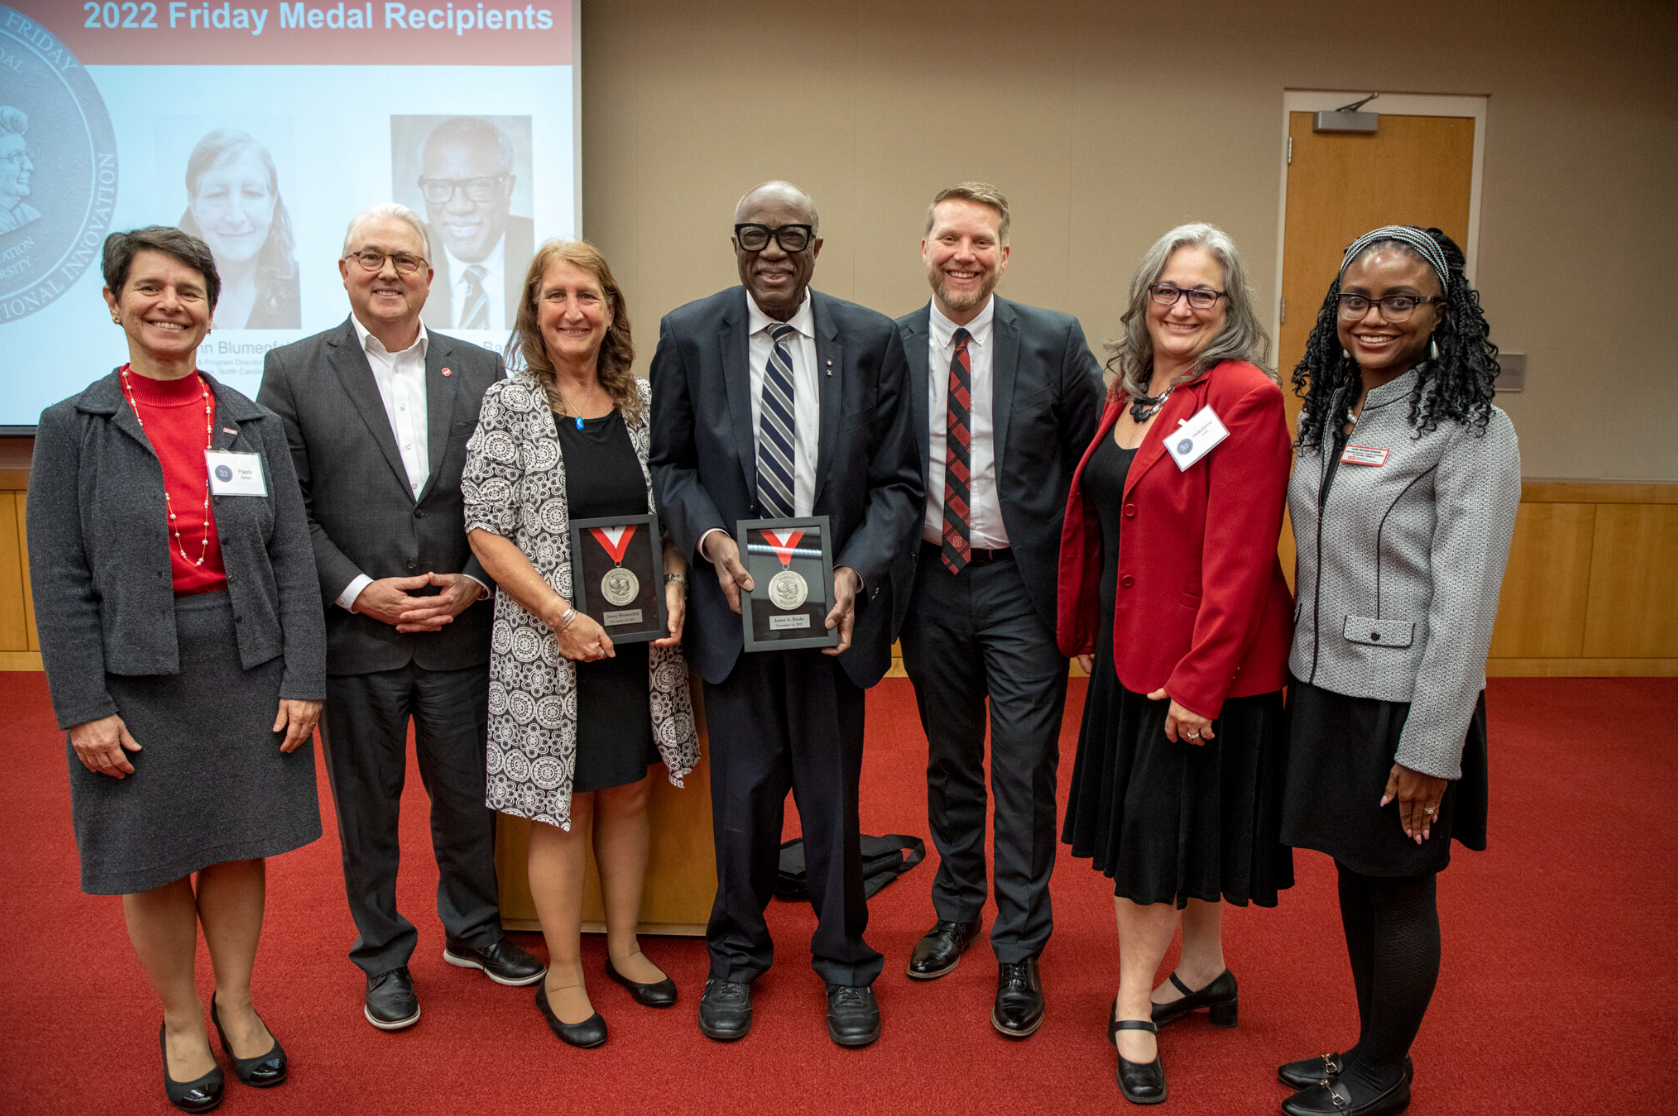 Friday Medal winners Joann Blumenfeld (center left) and Dr. James A. Banks (center right) hold their Friday Medal awards with ceremony speakers (from L to R) Dean Paola Sztajn, Chancellor Randy Woodson, Shaun Kellogg, Hollylynne Lee and Callie Edwards.